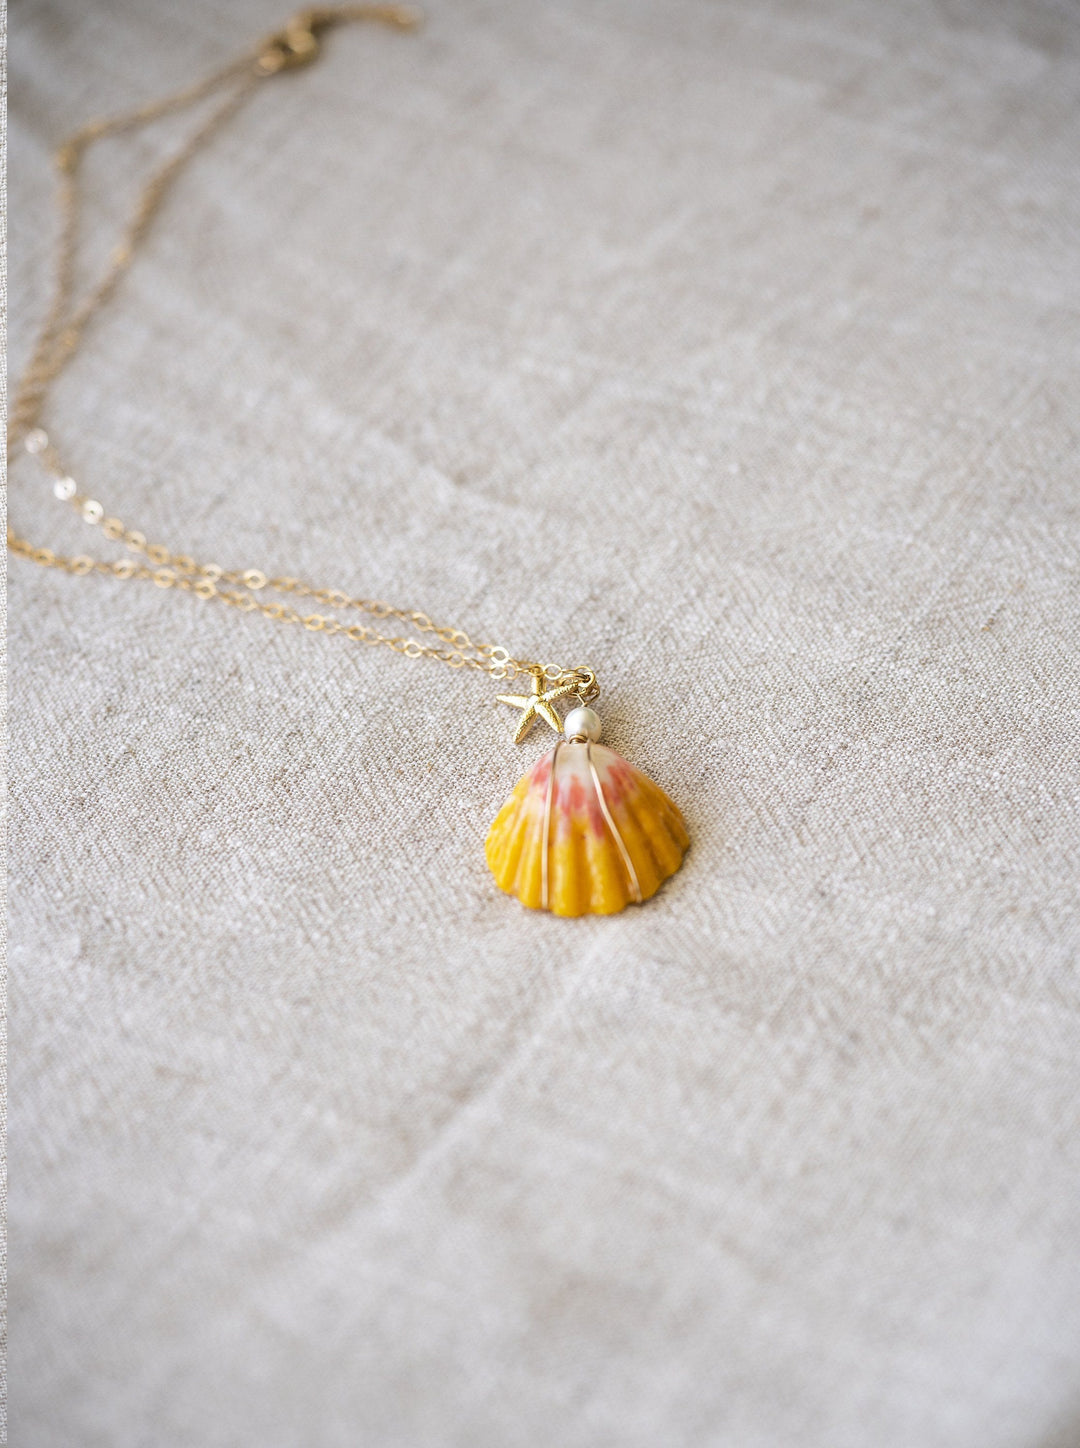 Hawaiian Sunrise Shell with Fresh Water Pearls and Starfish Charm necklace  14 KT Gold filled